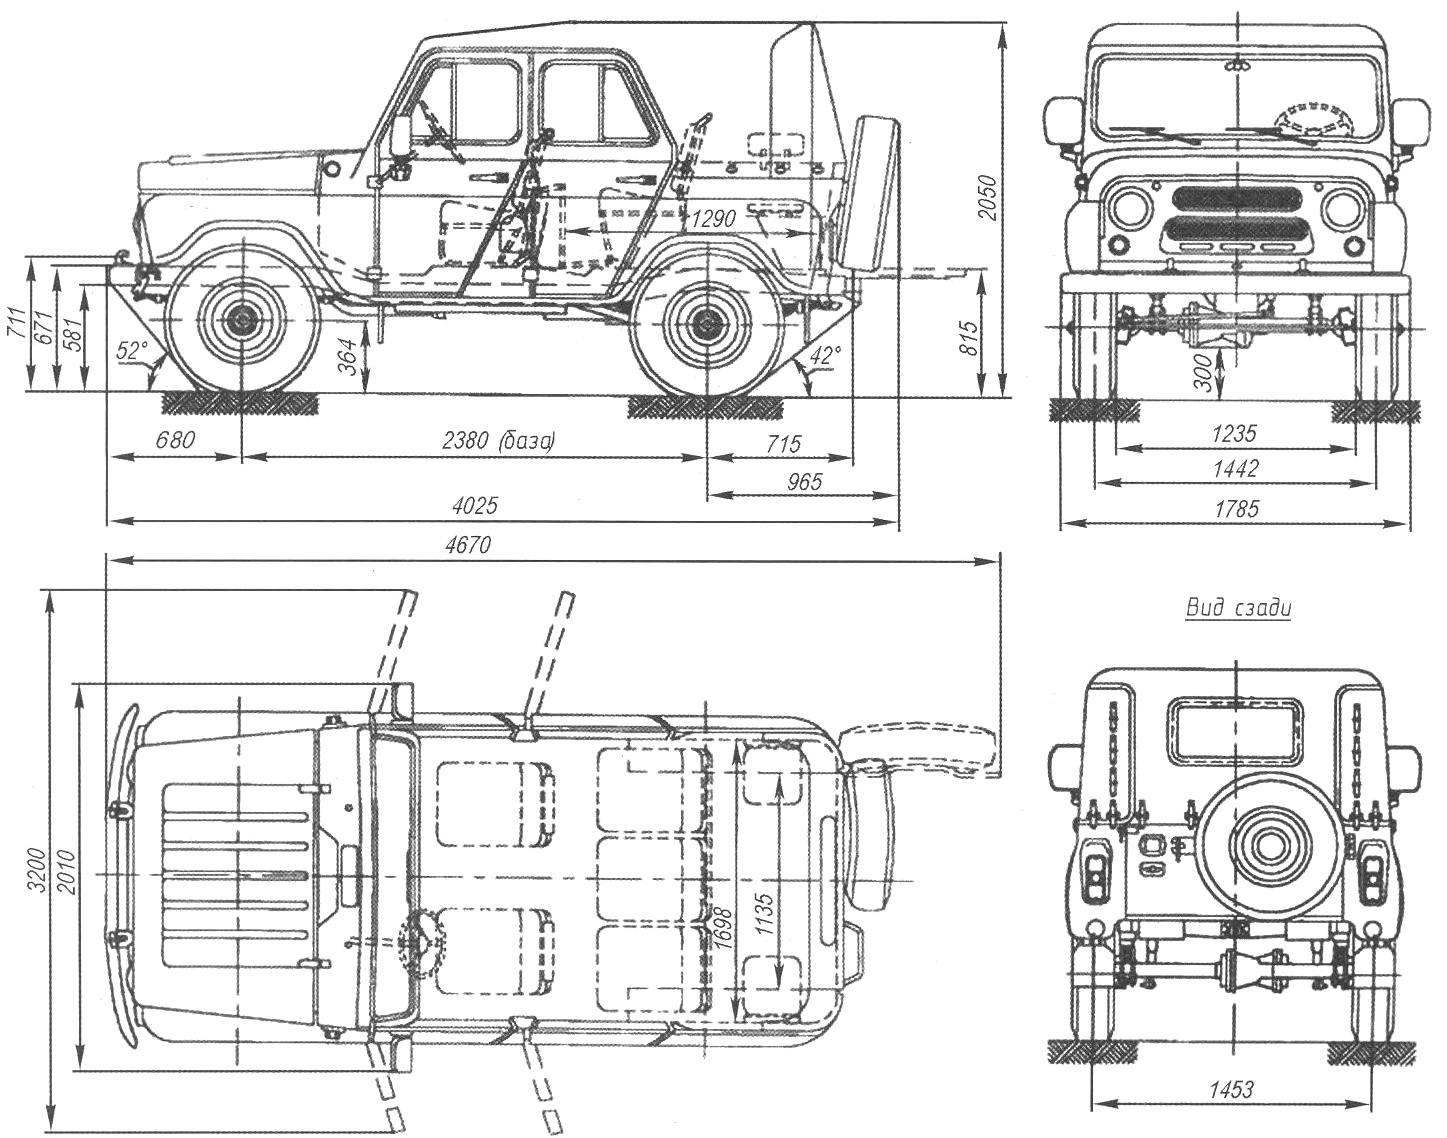 Basic dimensions, the UAZ-469 (UAZ-31512) — army all-terrain vehicle with onboard gearboxes and canvas top body